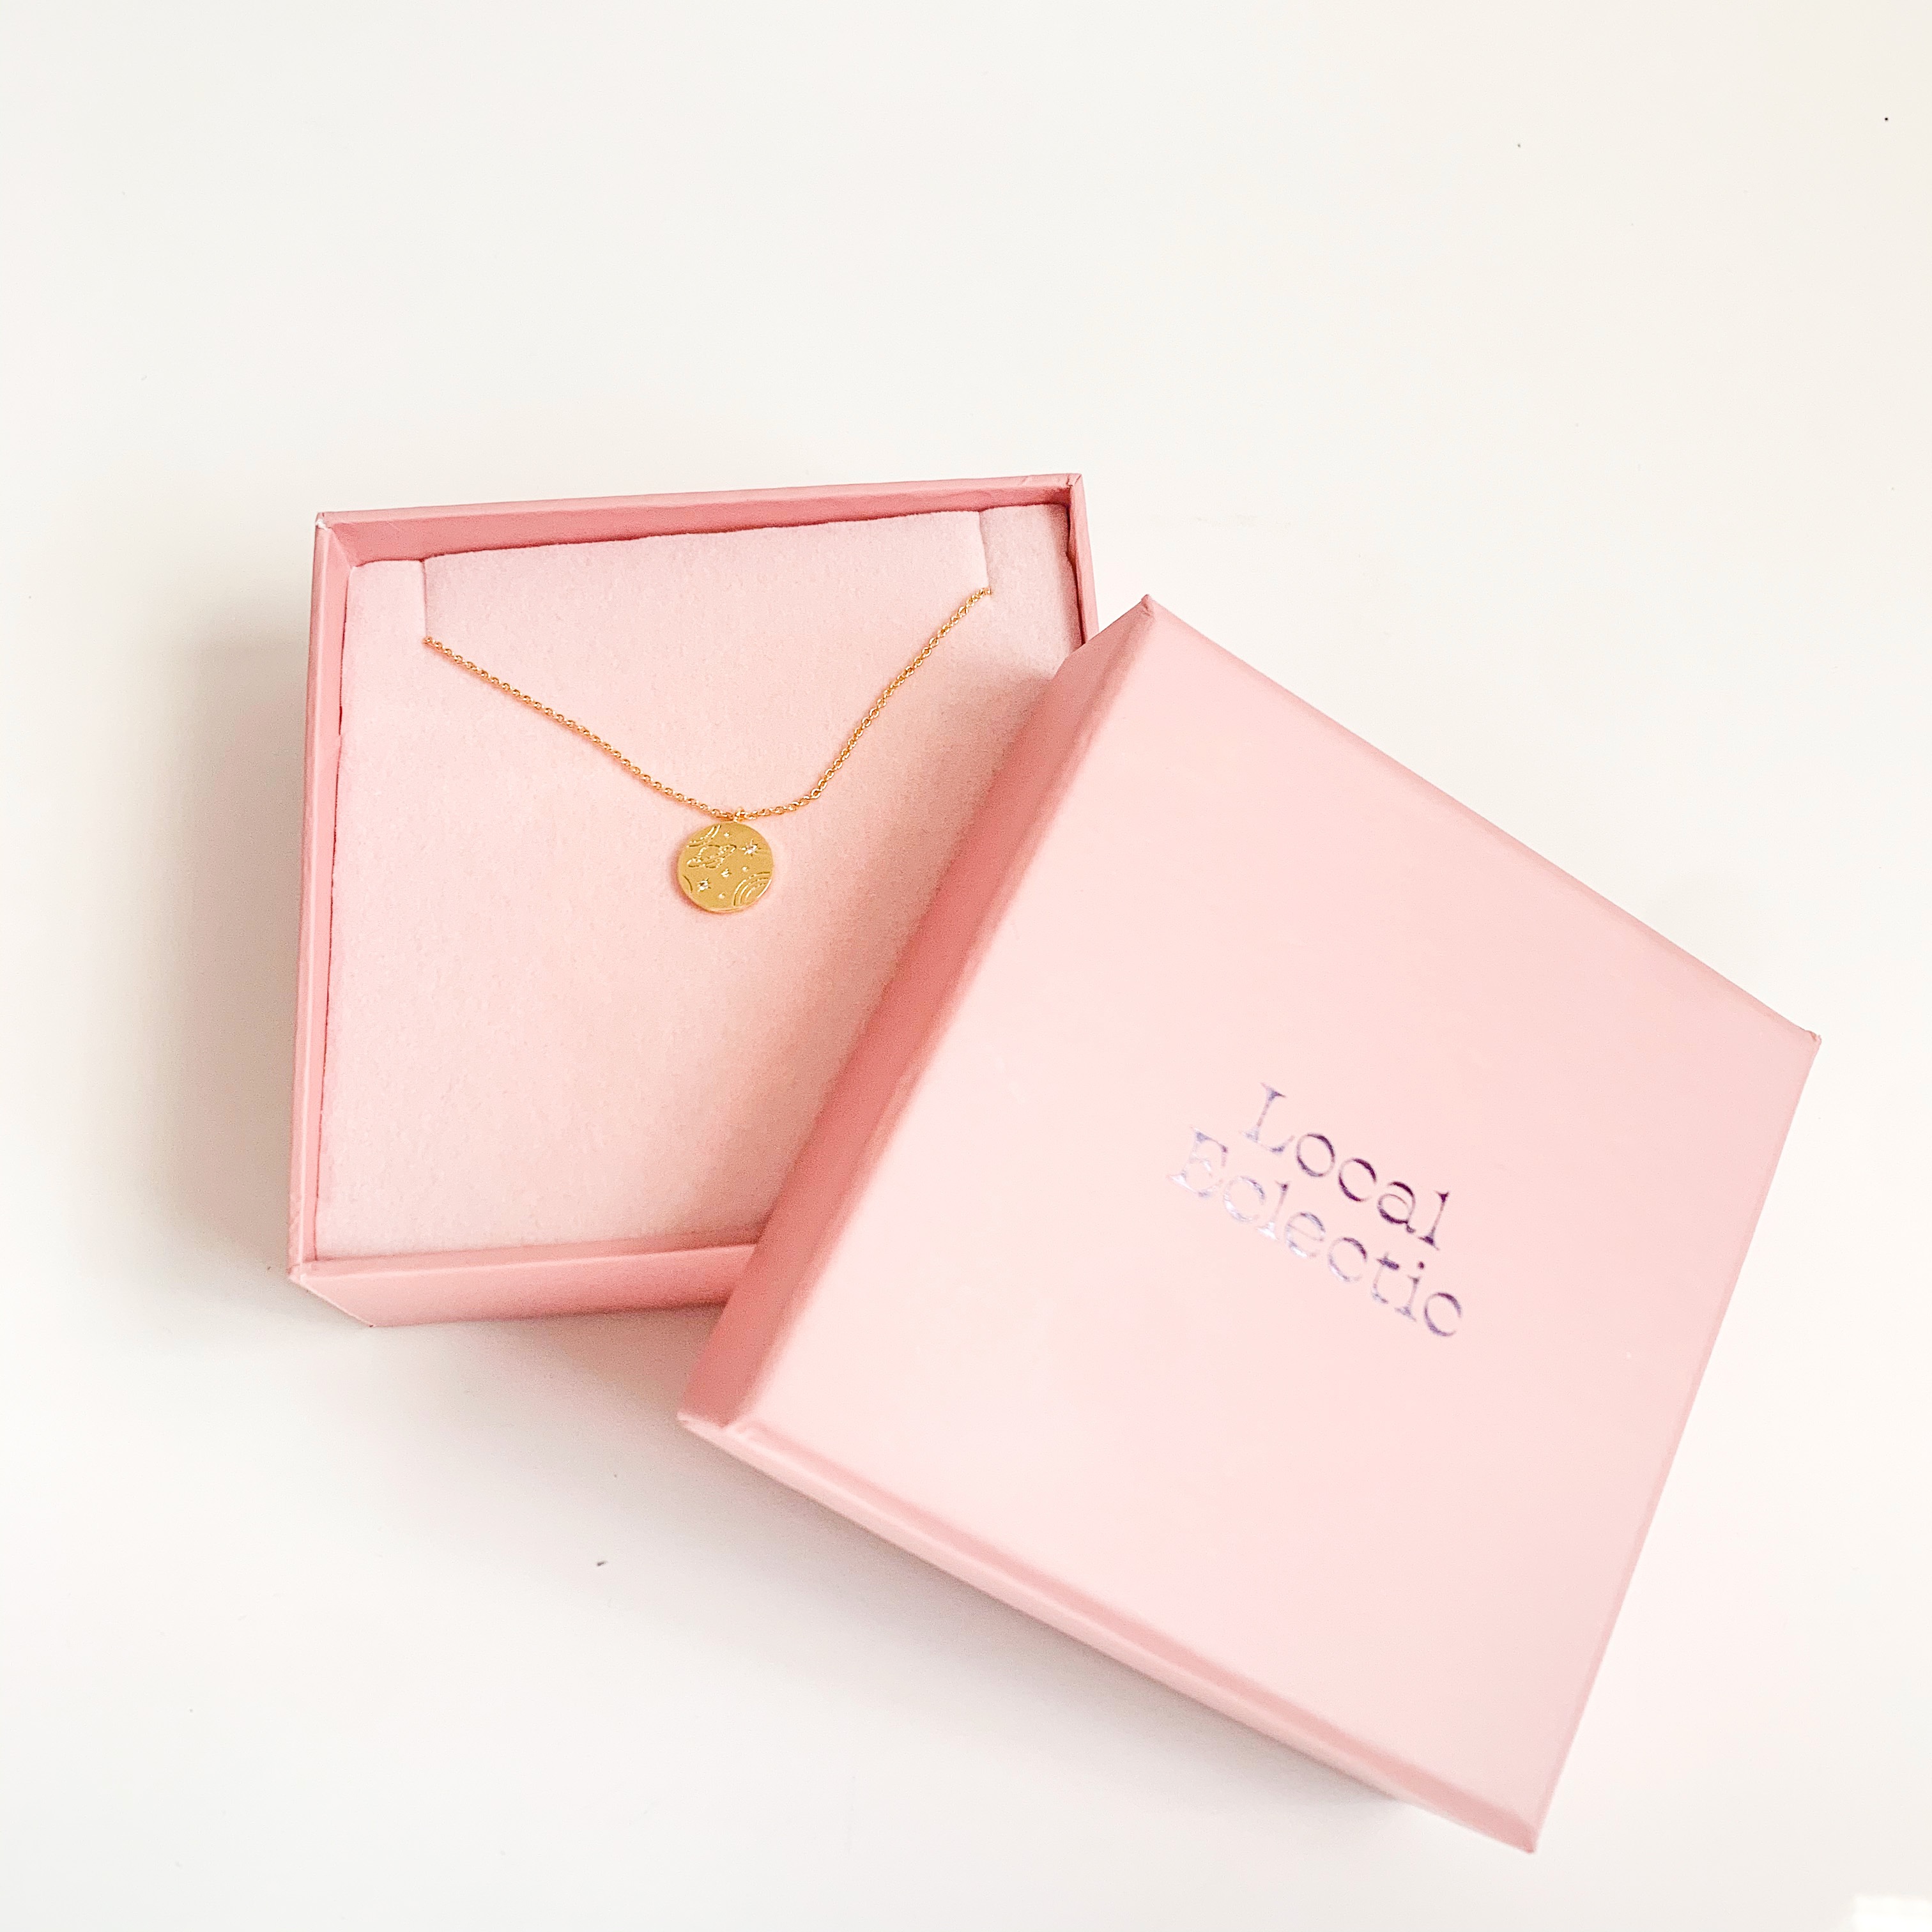 Glow by Local Eclectic Jewelry Box Review - Summer 2020 | MSA